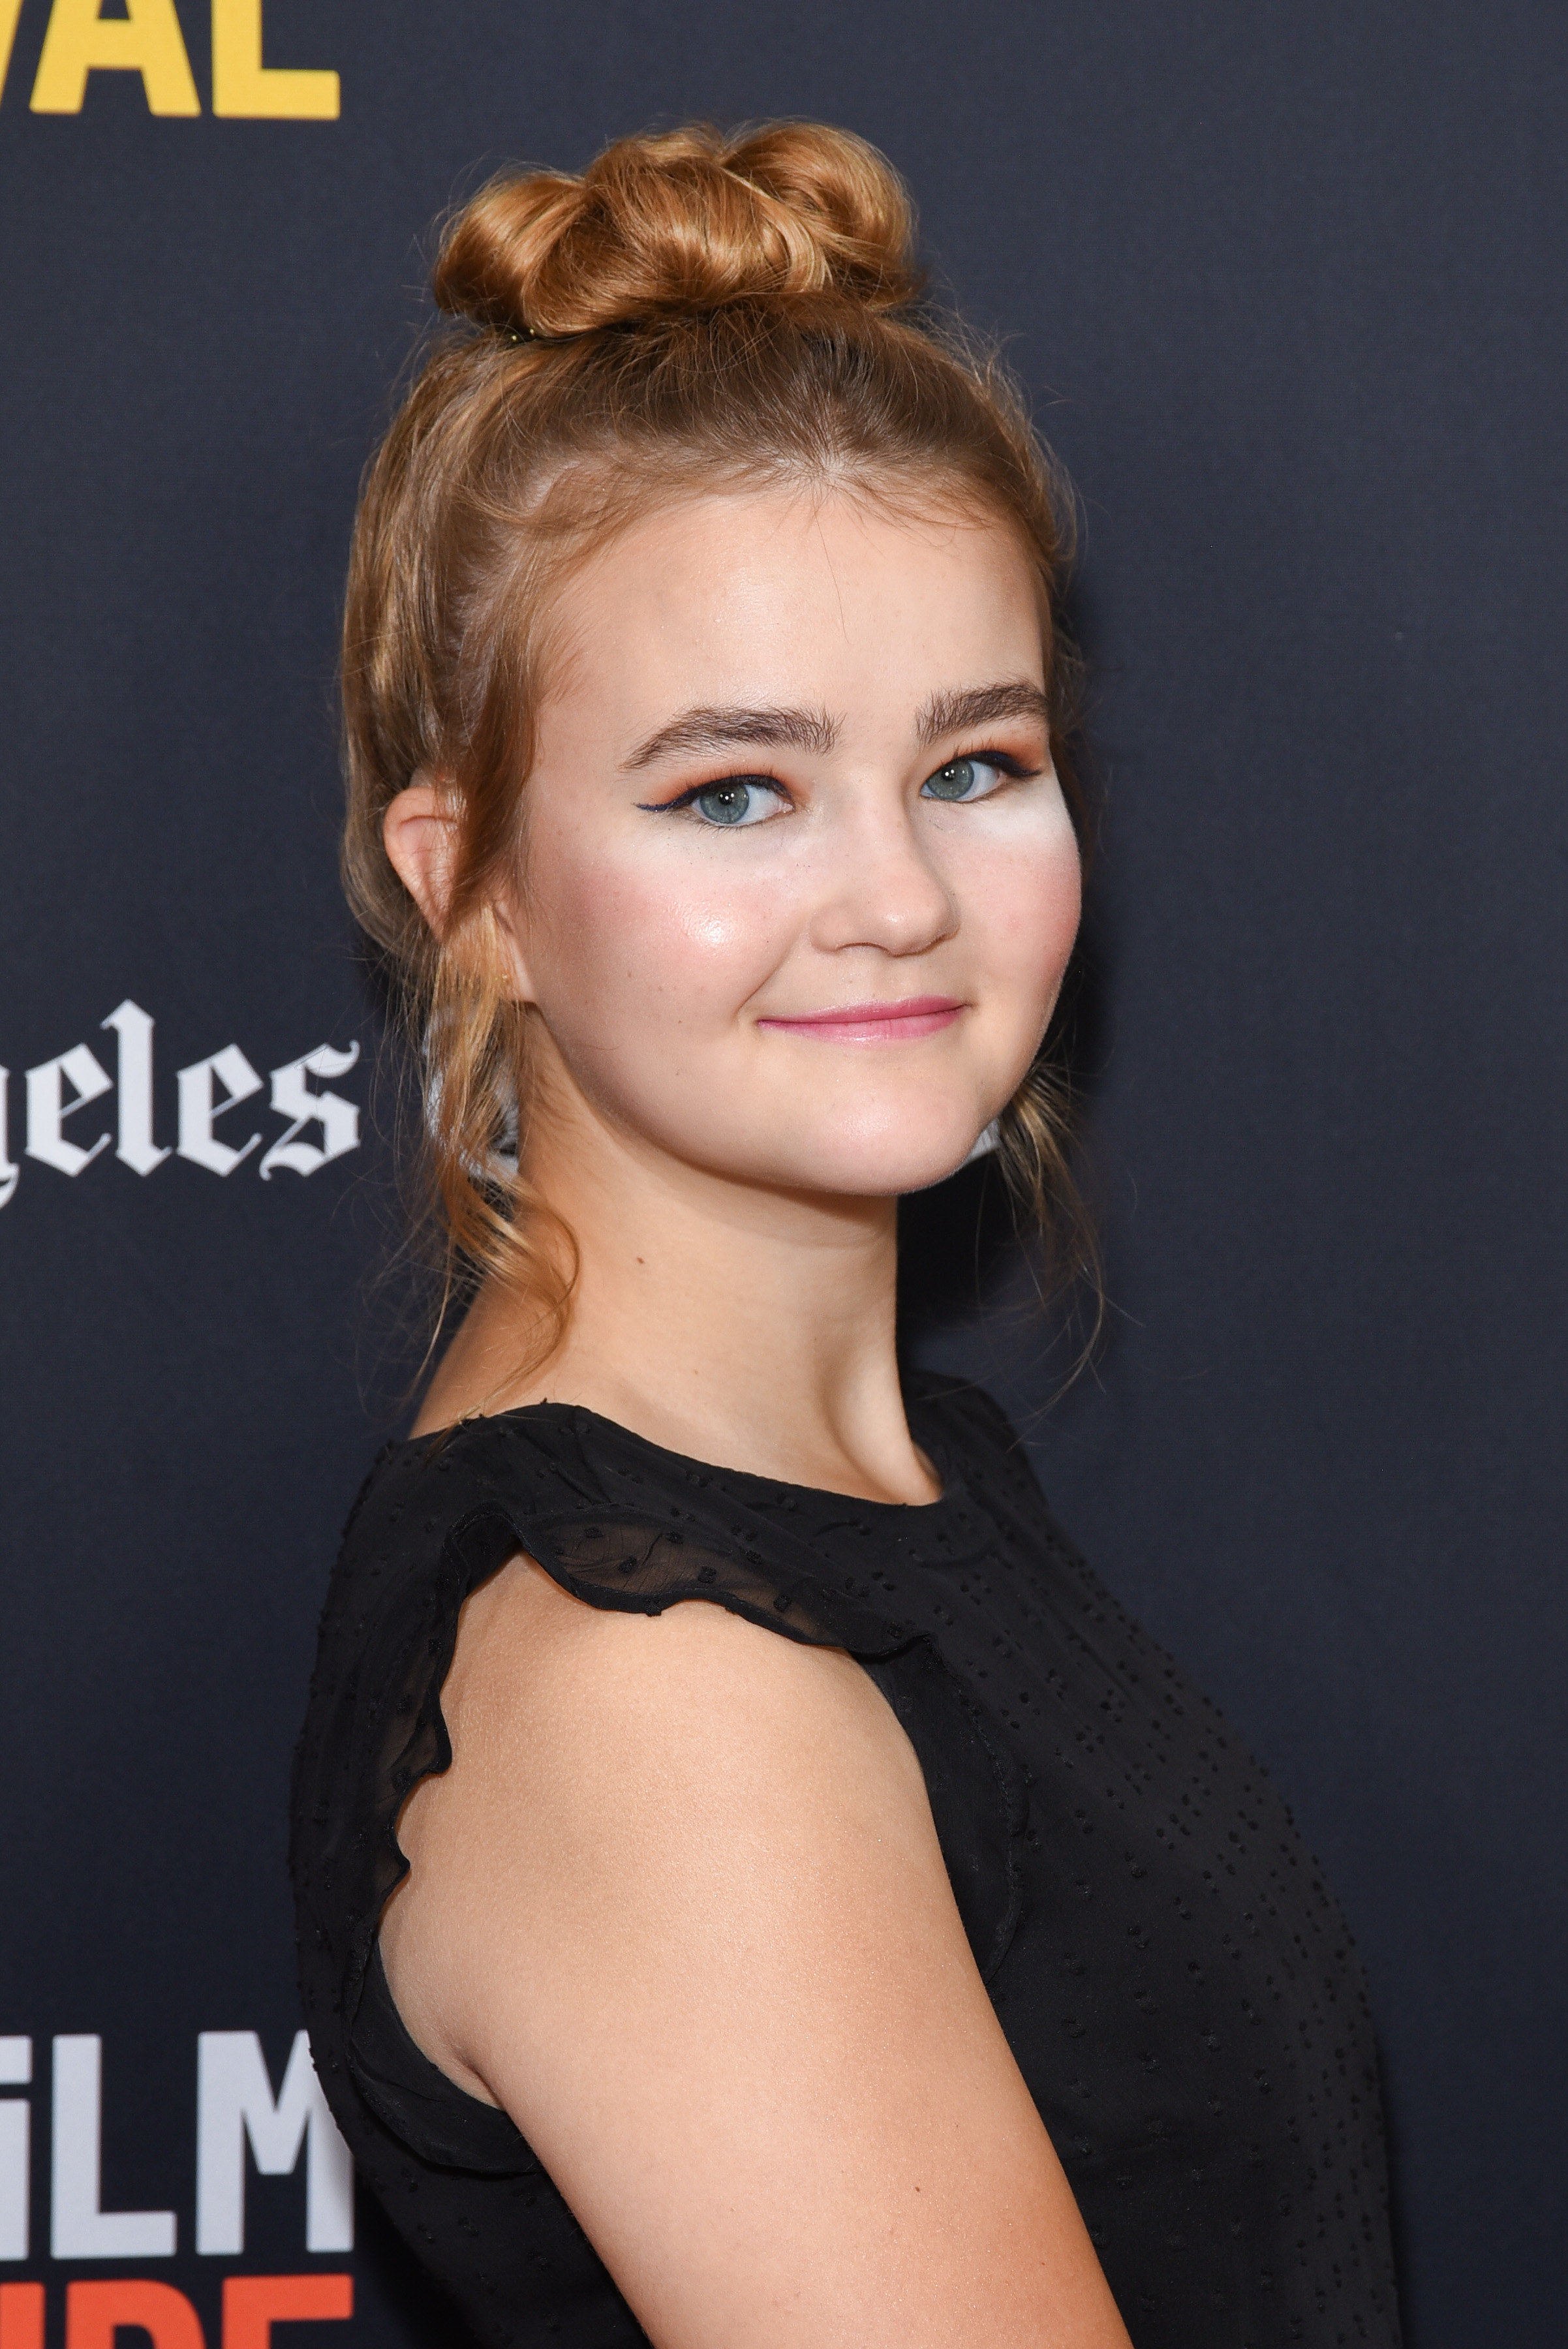 Millicent Simmonds on the red carpet